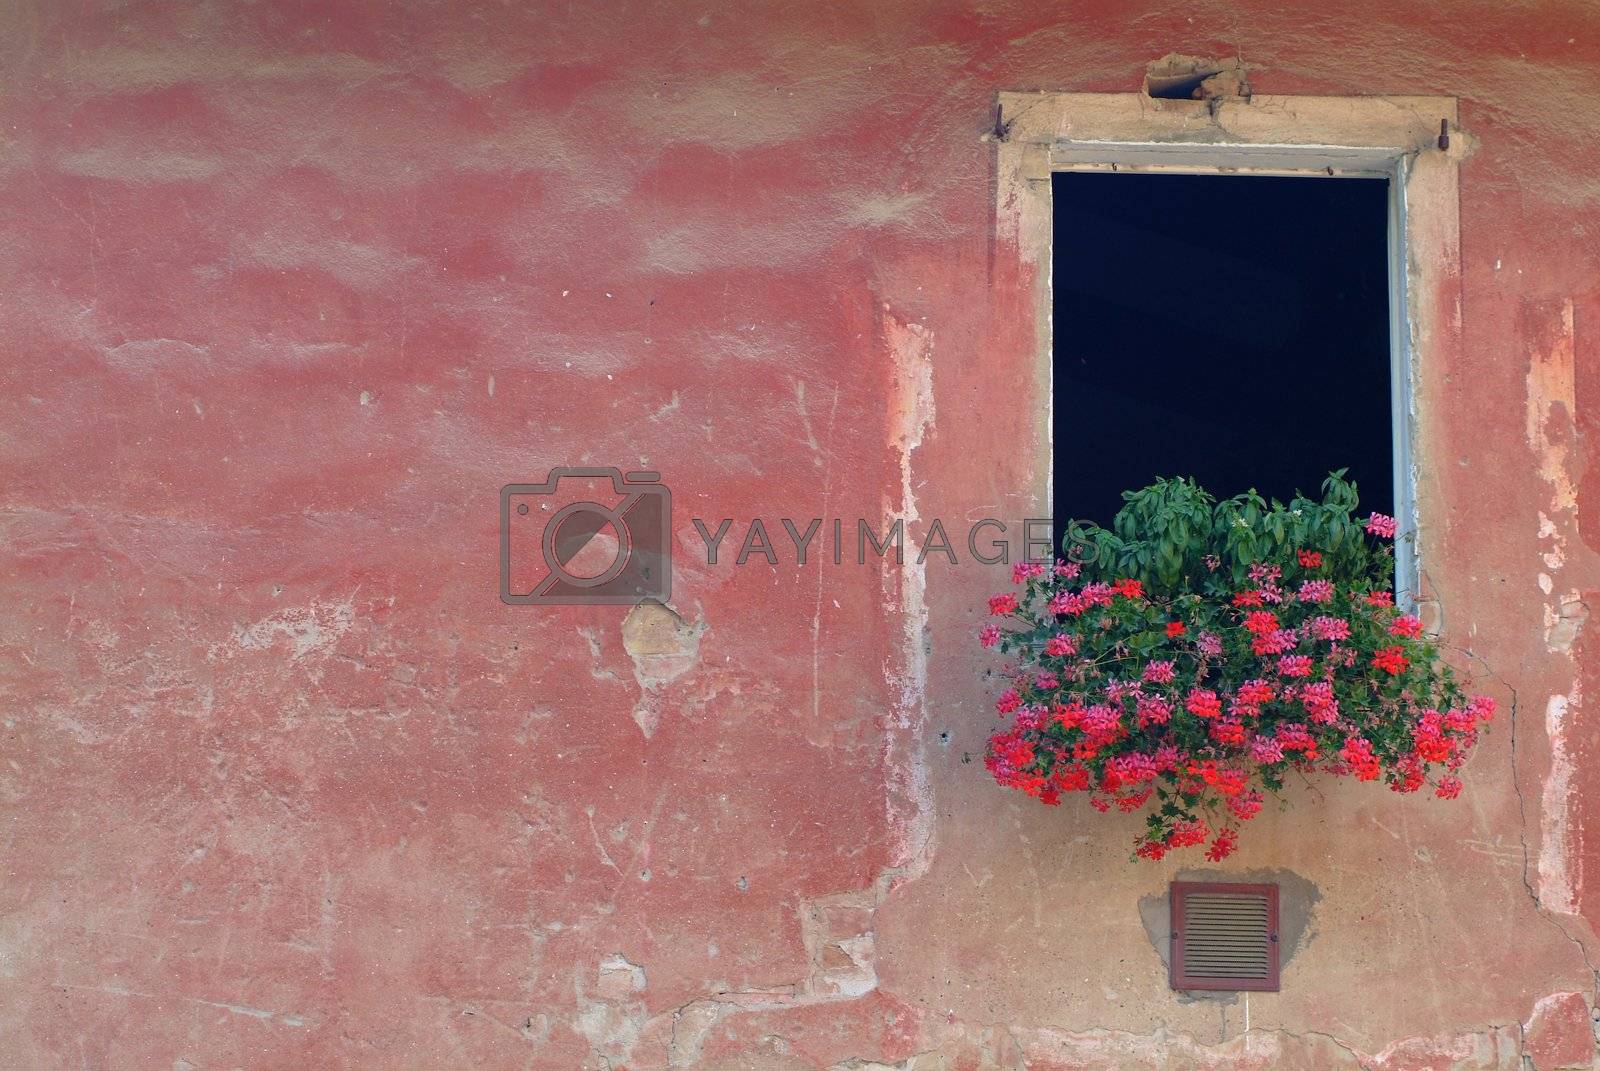 Royalty free image of fenster | window by fotofritz